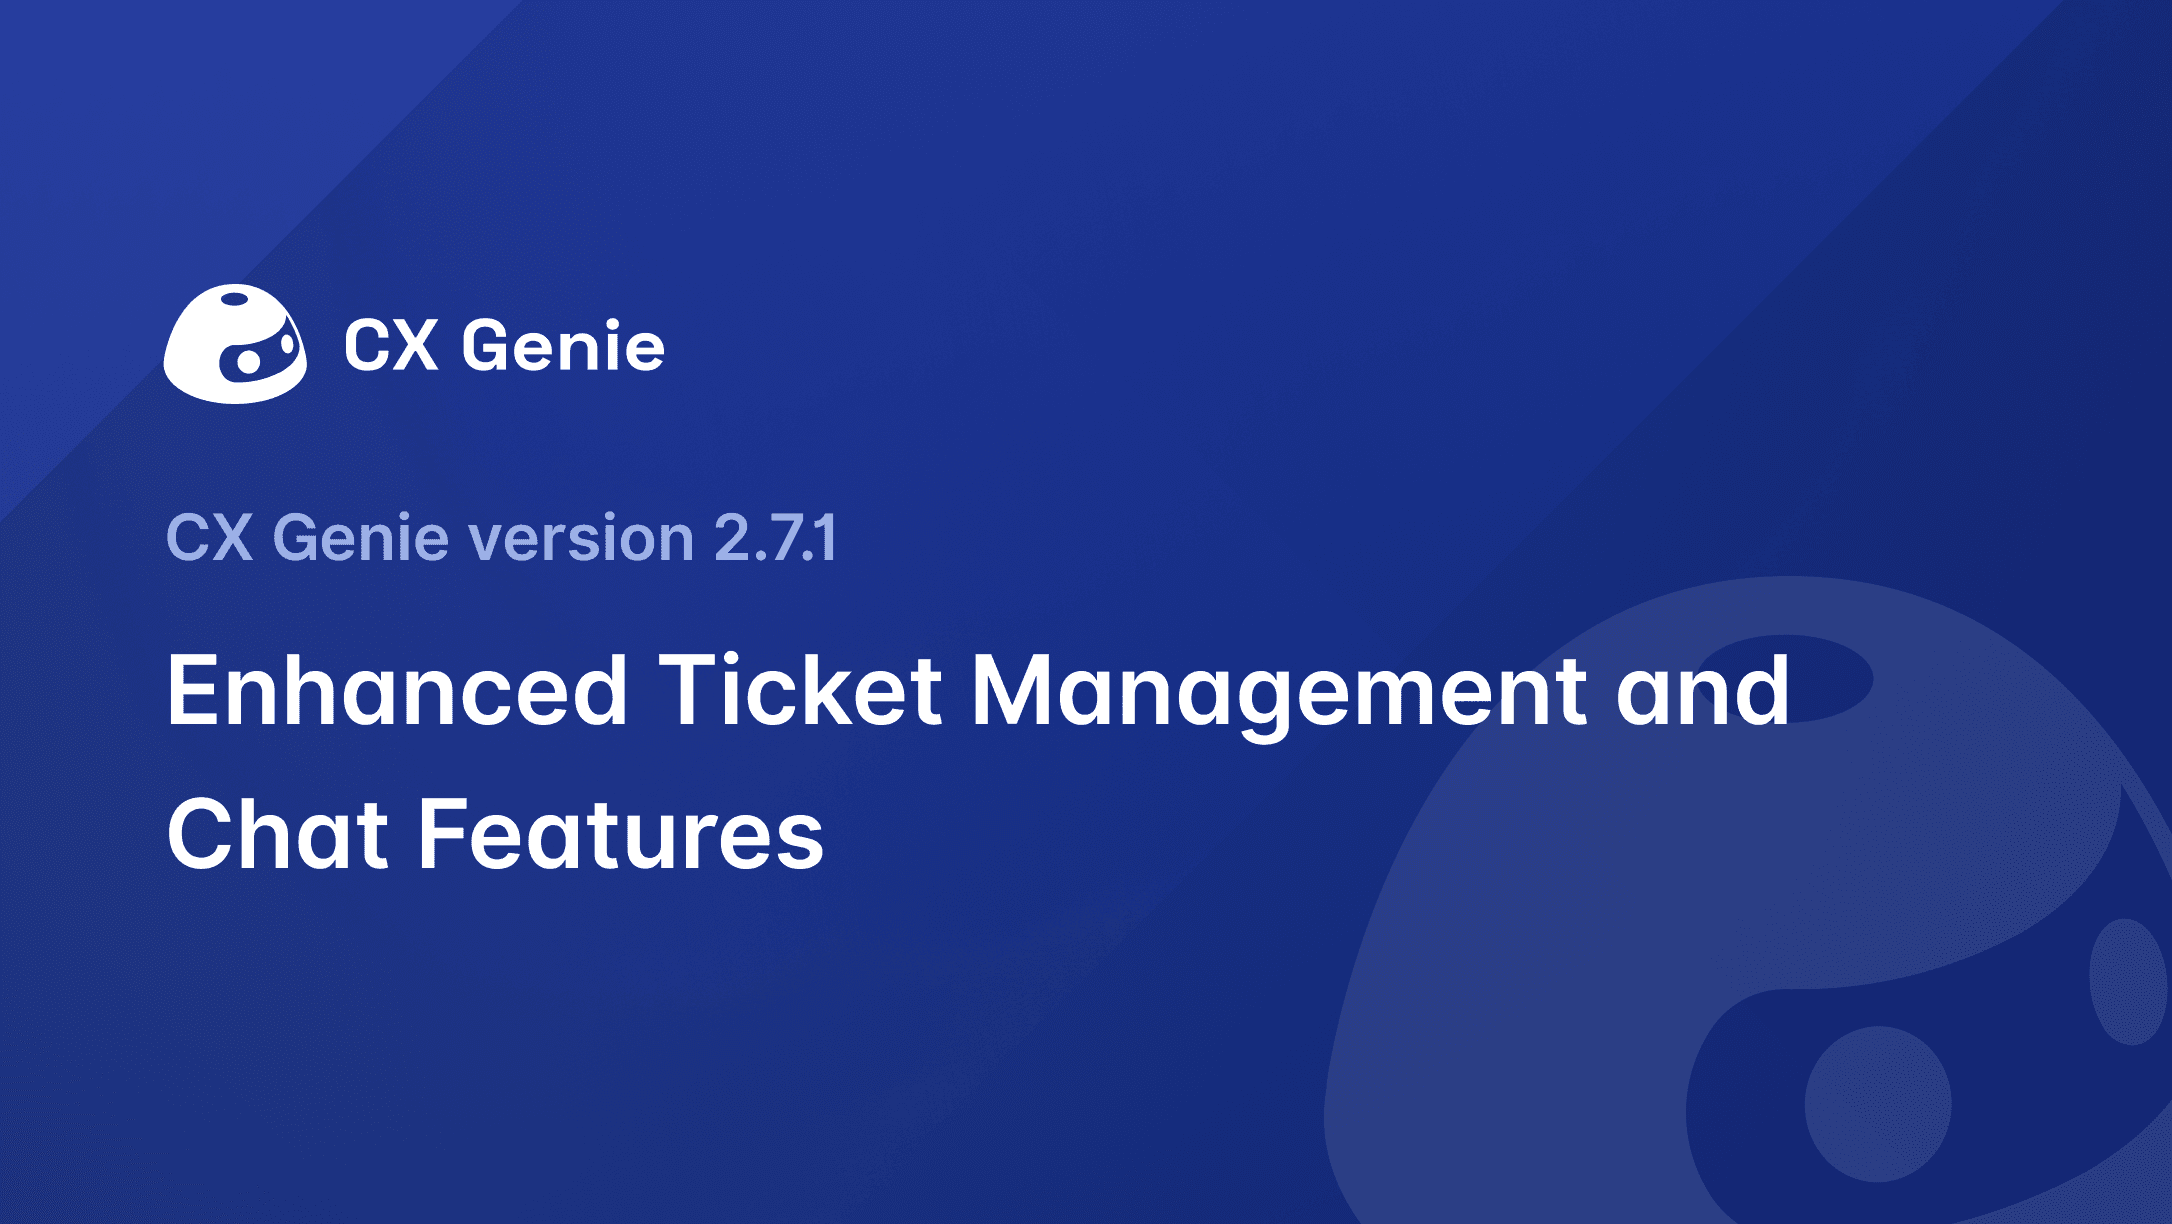 CX Genie - Version 2.7.1: Enhanced Ticket Management and Chat Features